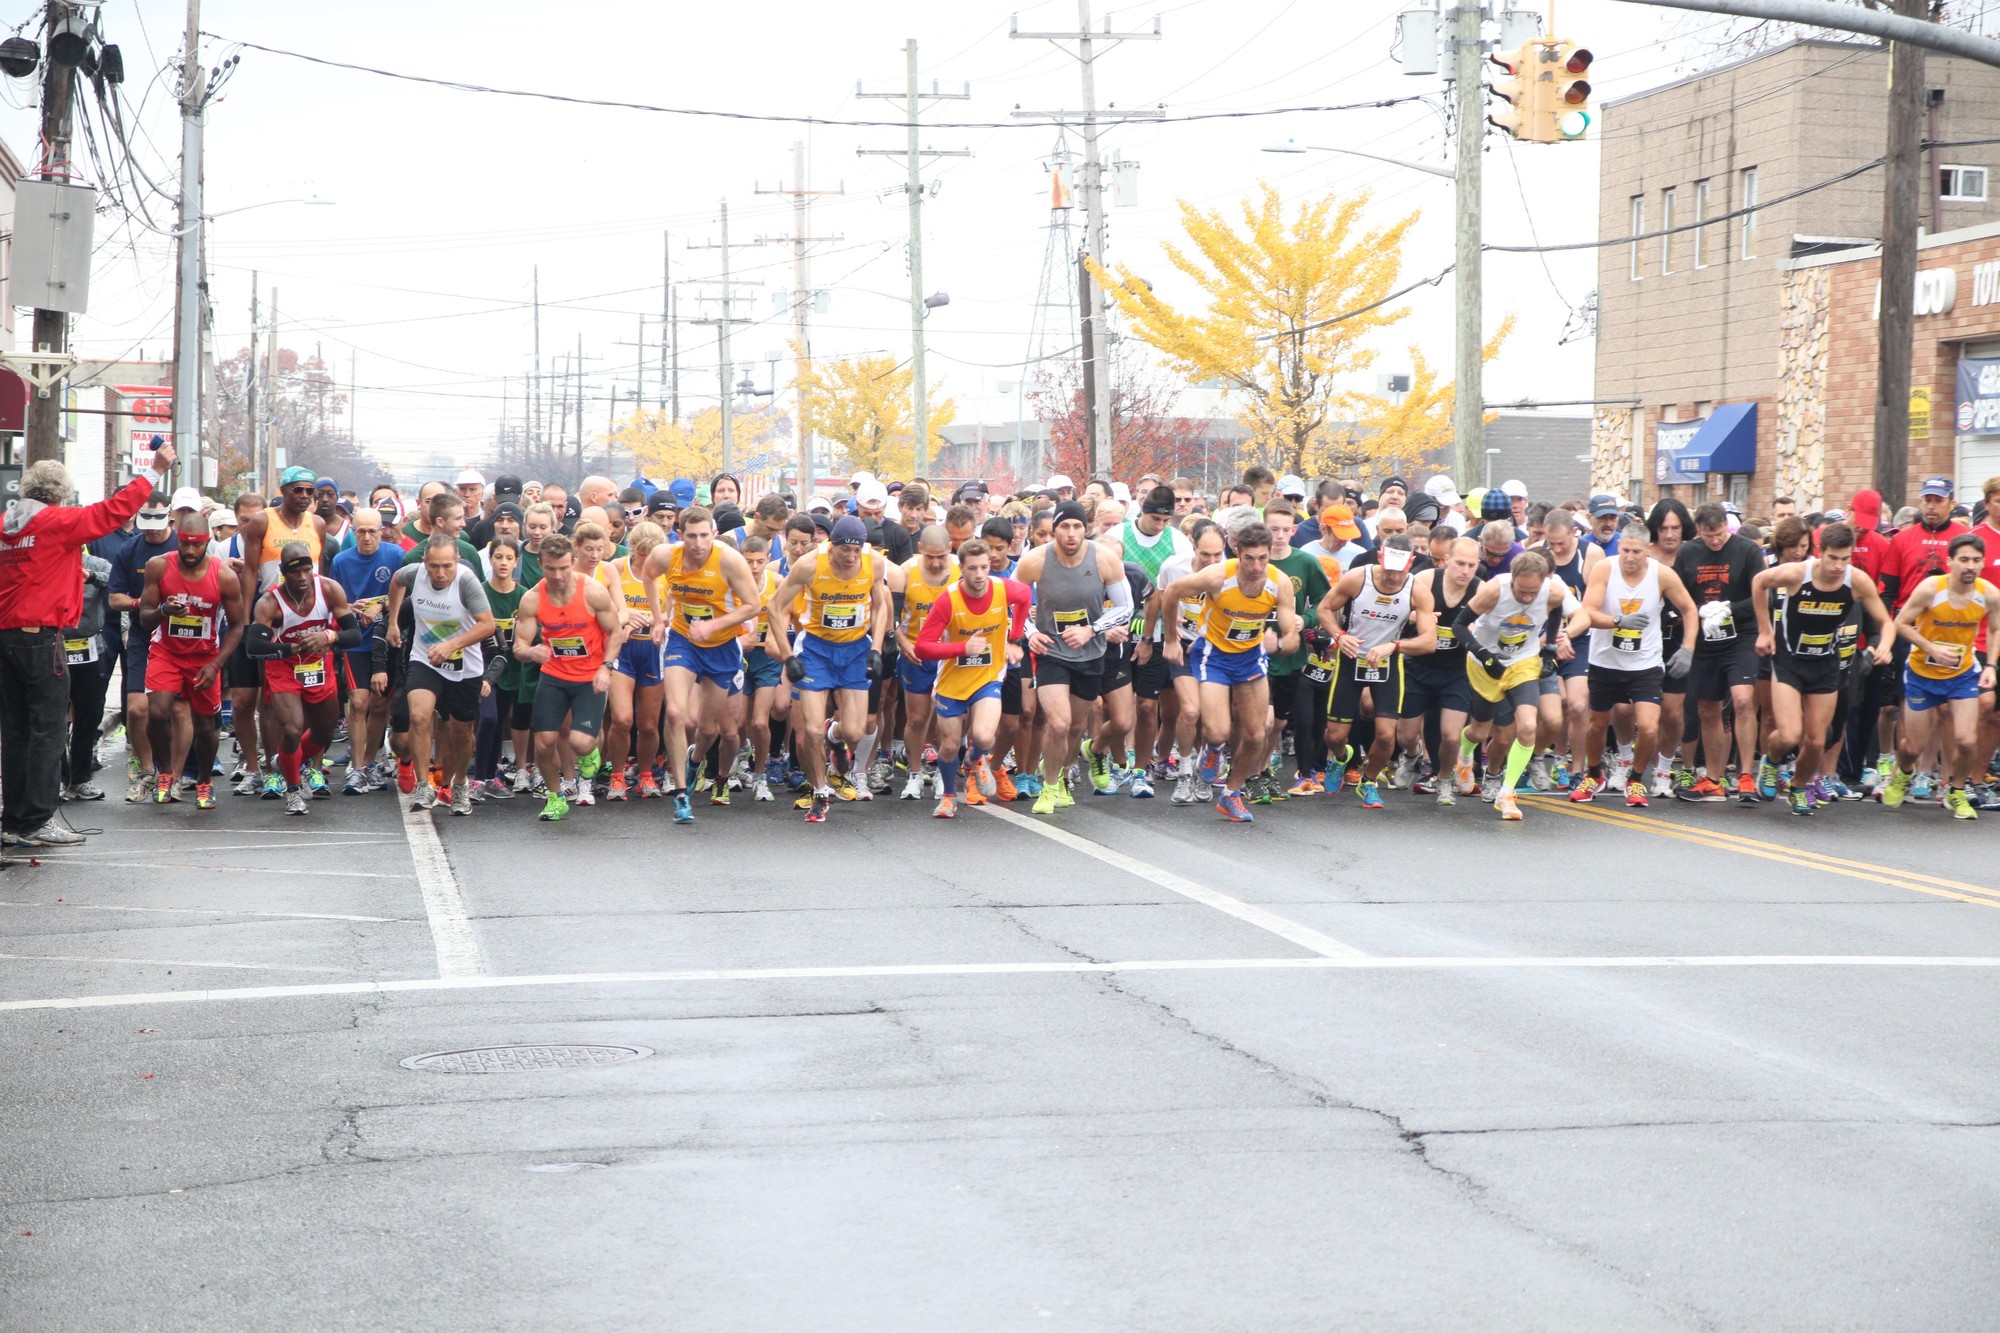 FROM 2013: At exactly 8:30am, runners from all over Long Island and New York City took to the streets of Lynbrook for the 9th annual Fly With the Owls 4 mile run/walk.